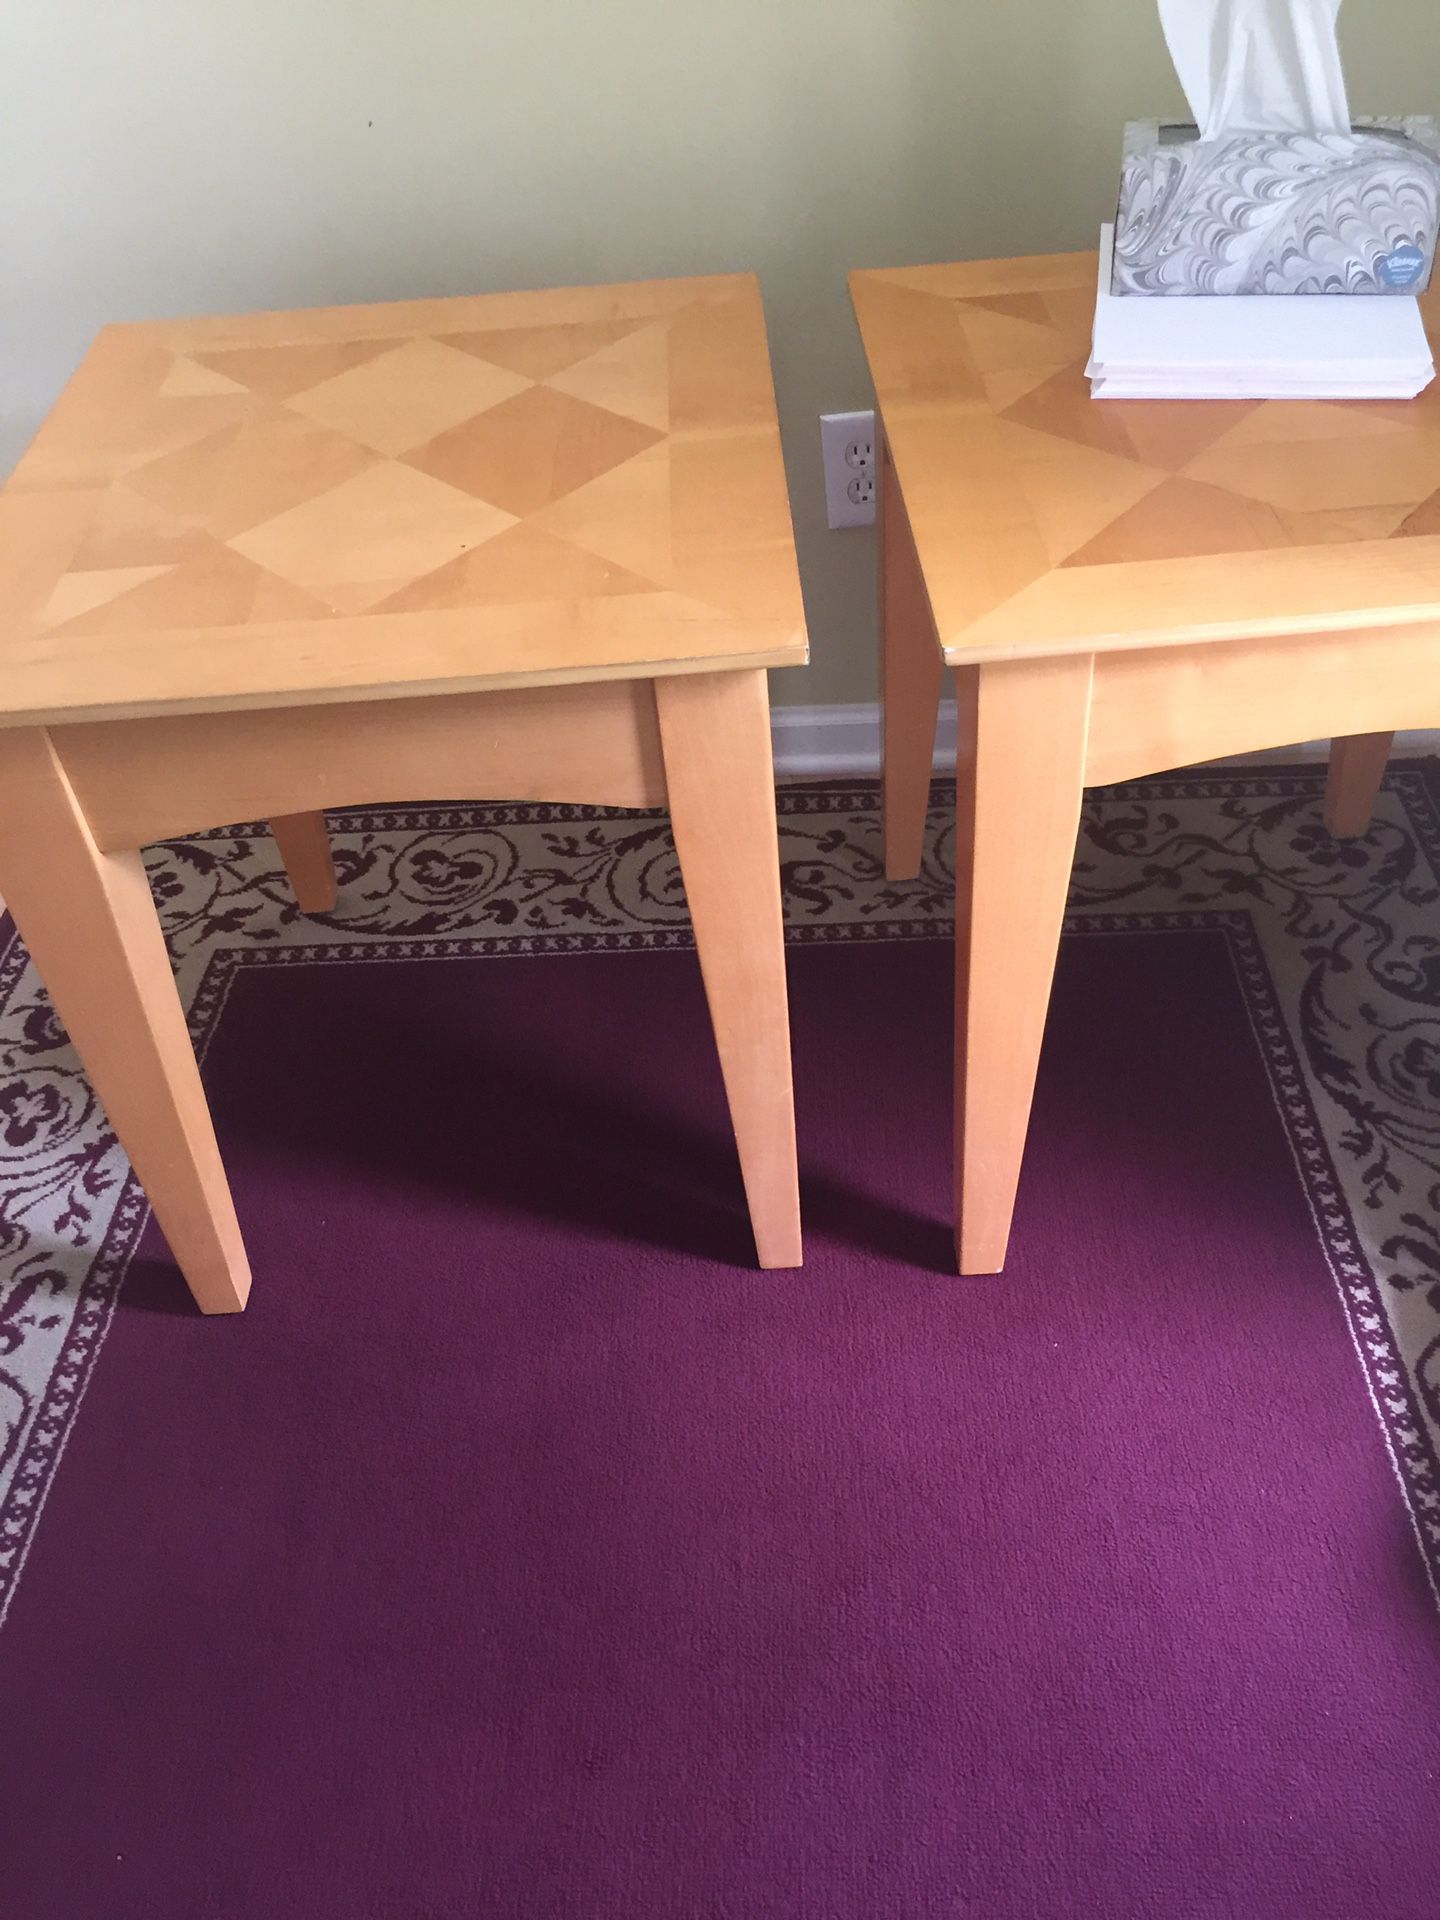 Wood two coffee table or end tables for sale